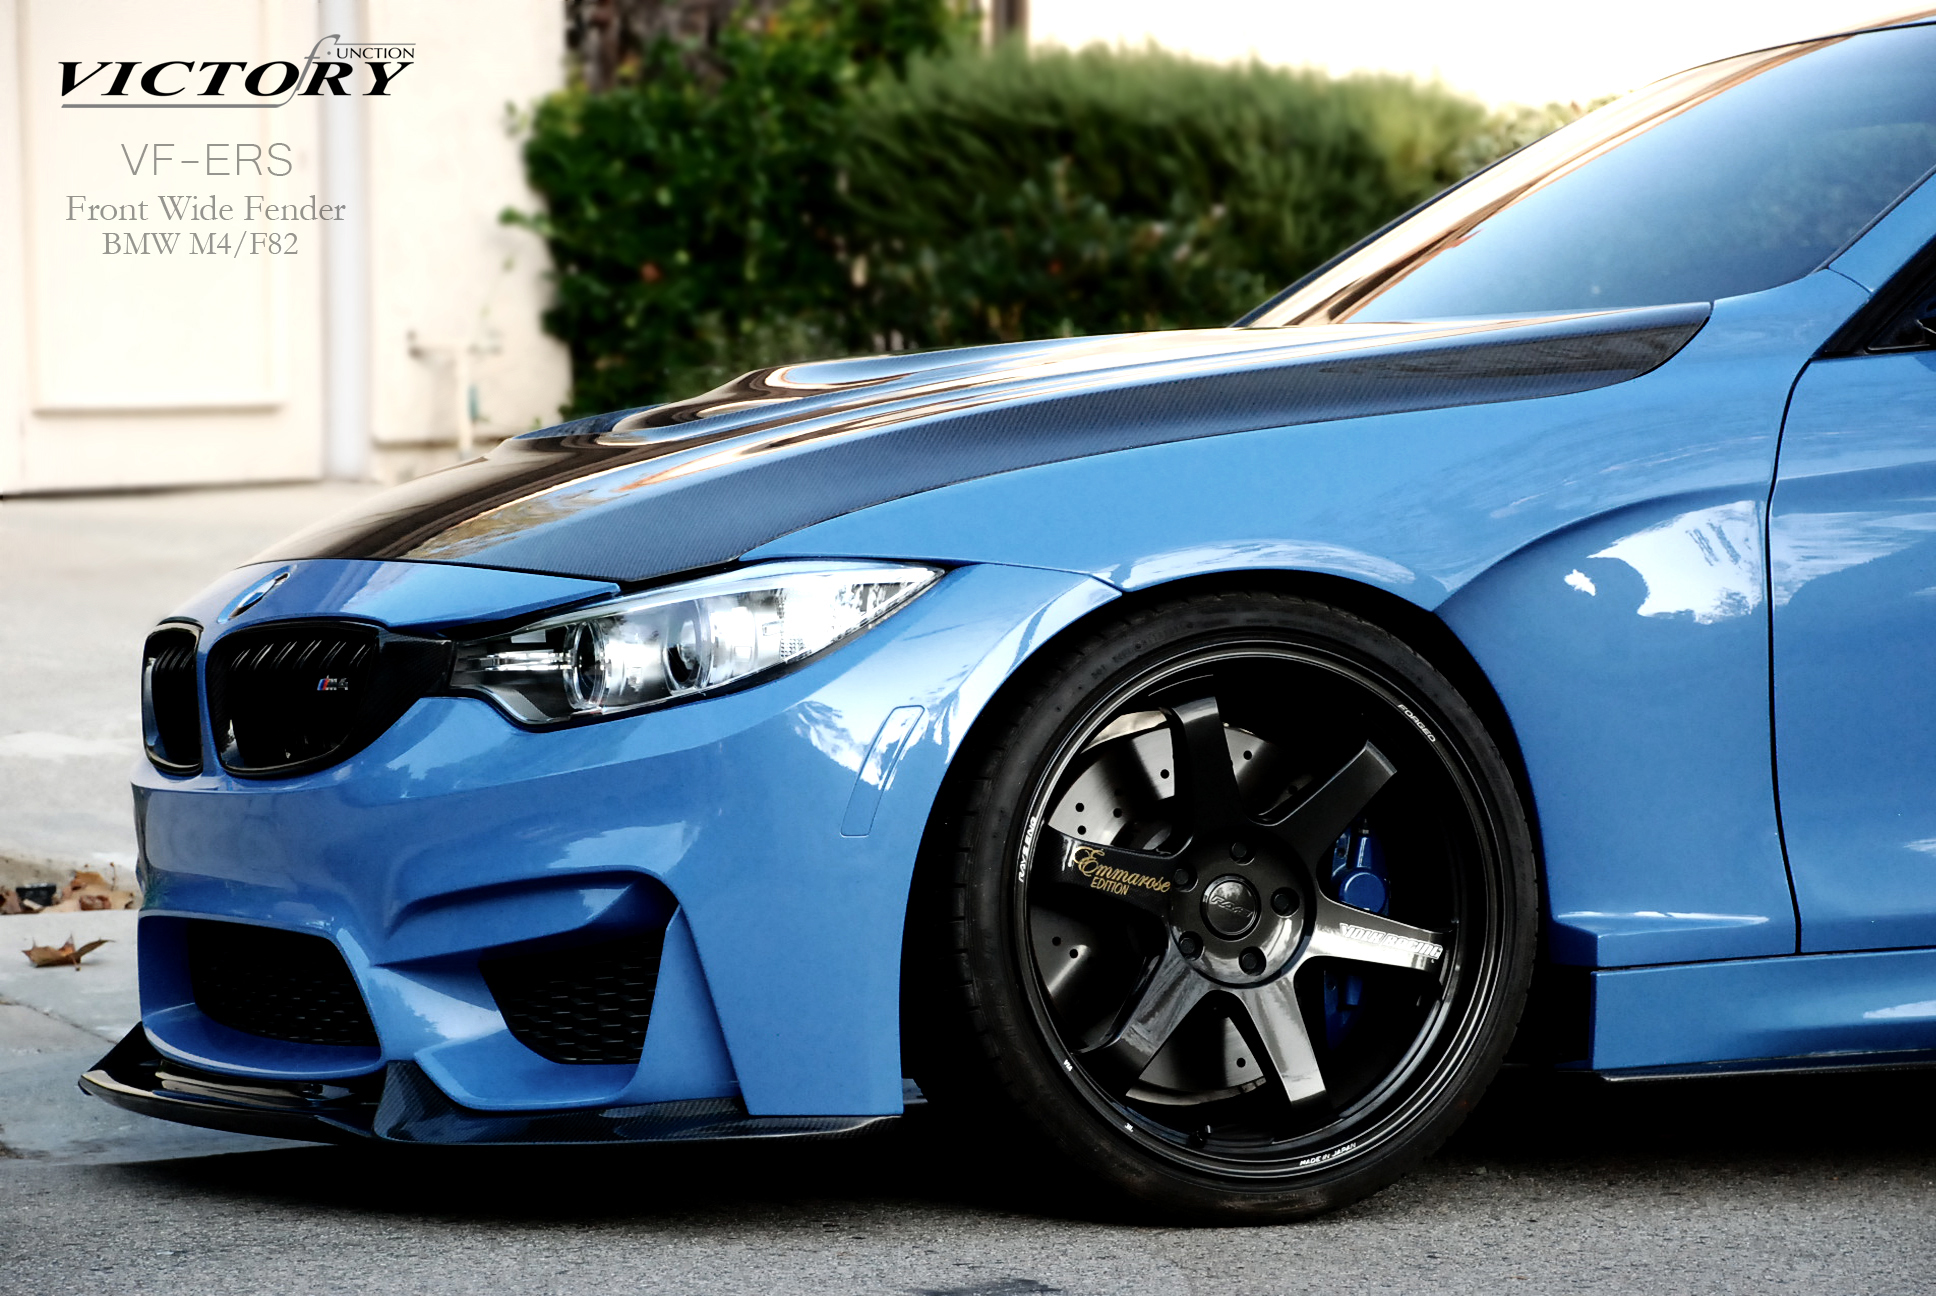 Victory Function Fenders on BMW F82 M4 